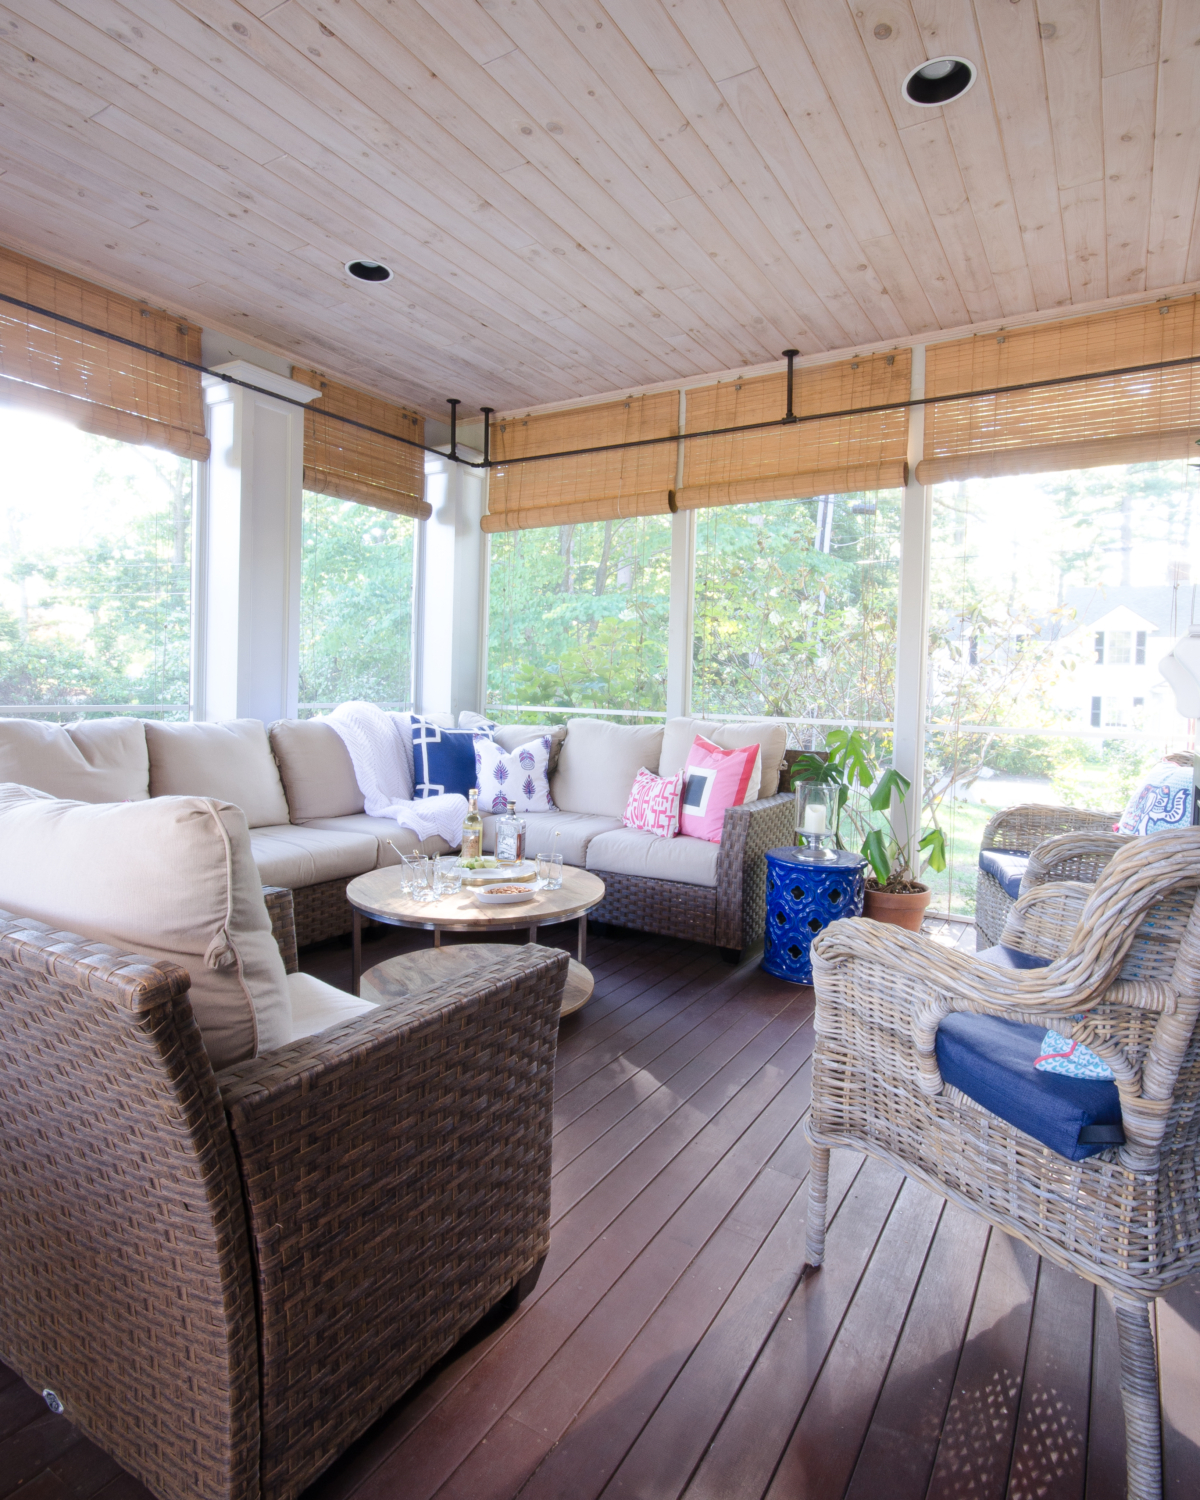 Stunning classic screened porch with pink, navy blue, and white.